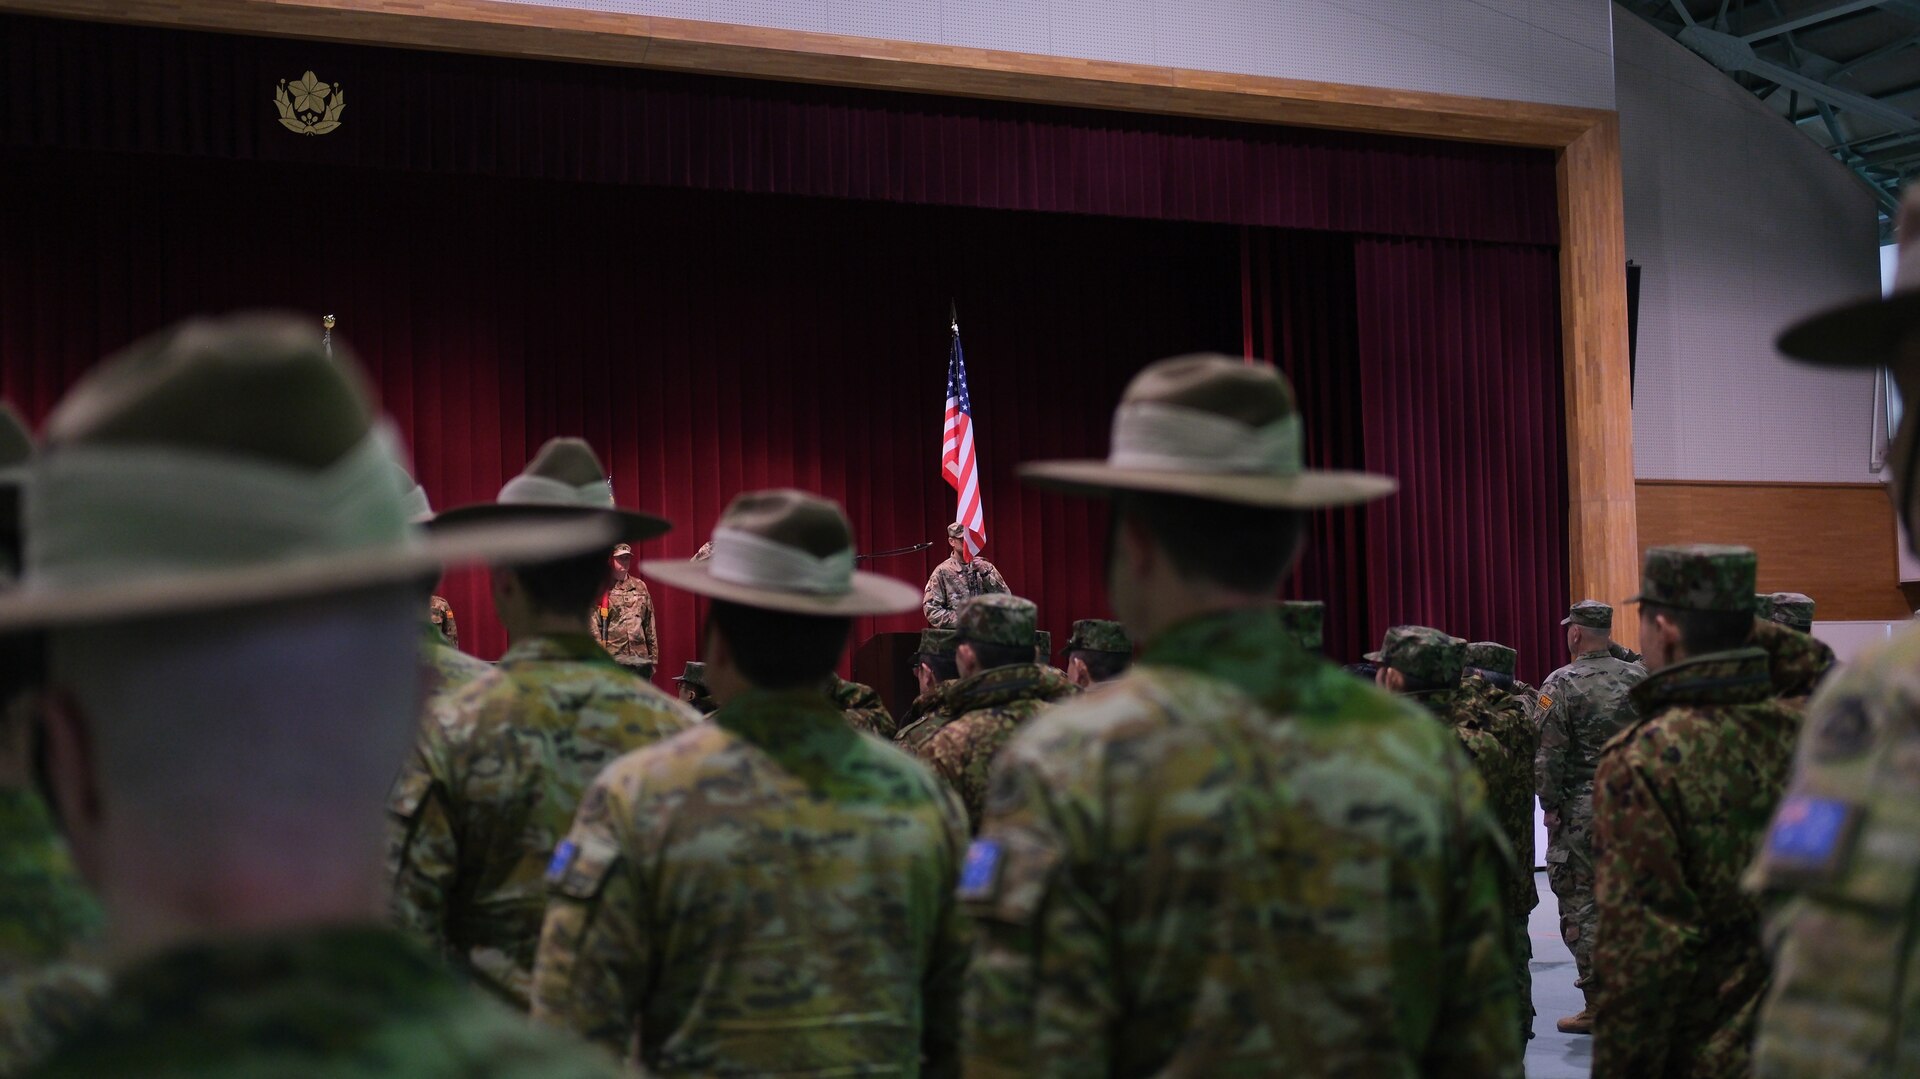 Members of the Japan Ground Self-Defense Force and soldiers from the U.S. Army's 11th Airborne Division, salute during the opening ceremony of Yama Sakura 85 on Camp Higashi-Chitose, Japan, Dec. 3, 2023. YS 85 is a trilateral command post exercise featuring U.S. soldiers, members of the JGSDF, and soldiers from the Australian Army's 1st Division, and demonstrates the strength of the relationship between the three countries and their commitment to a free and open Indo-Pacific.